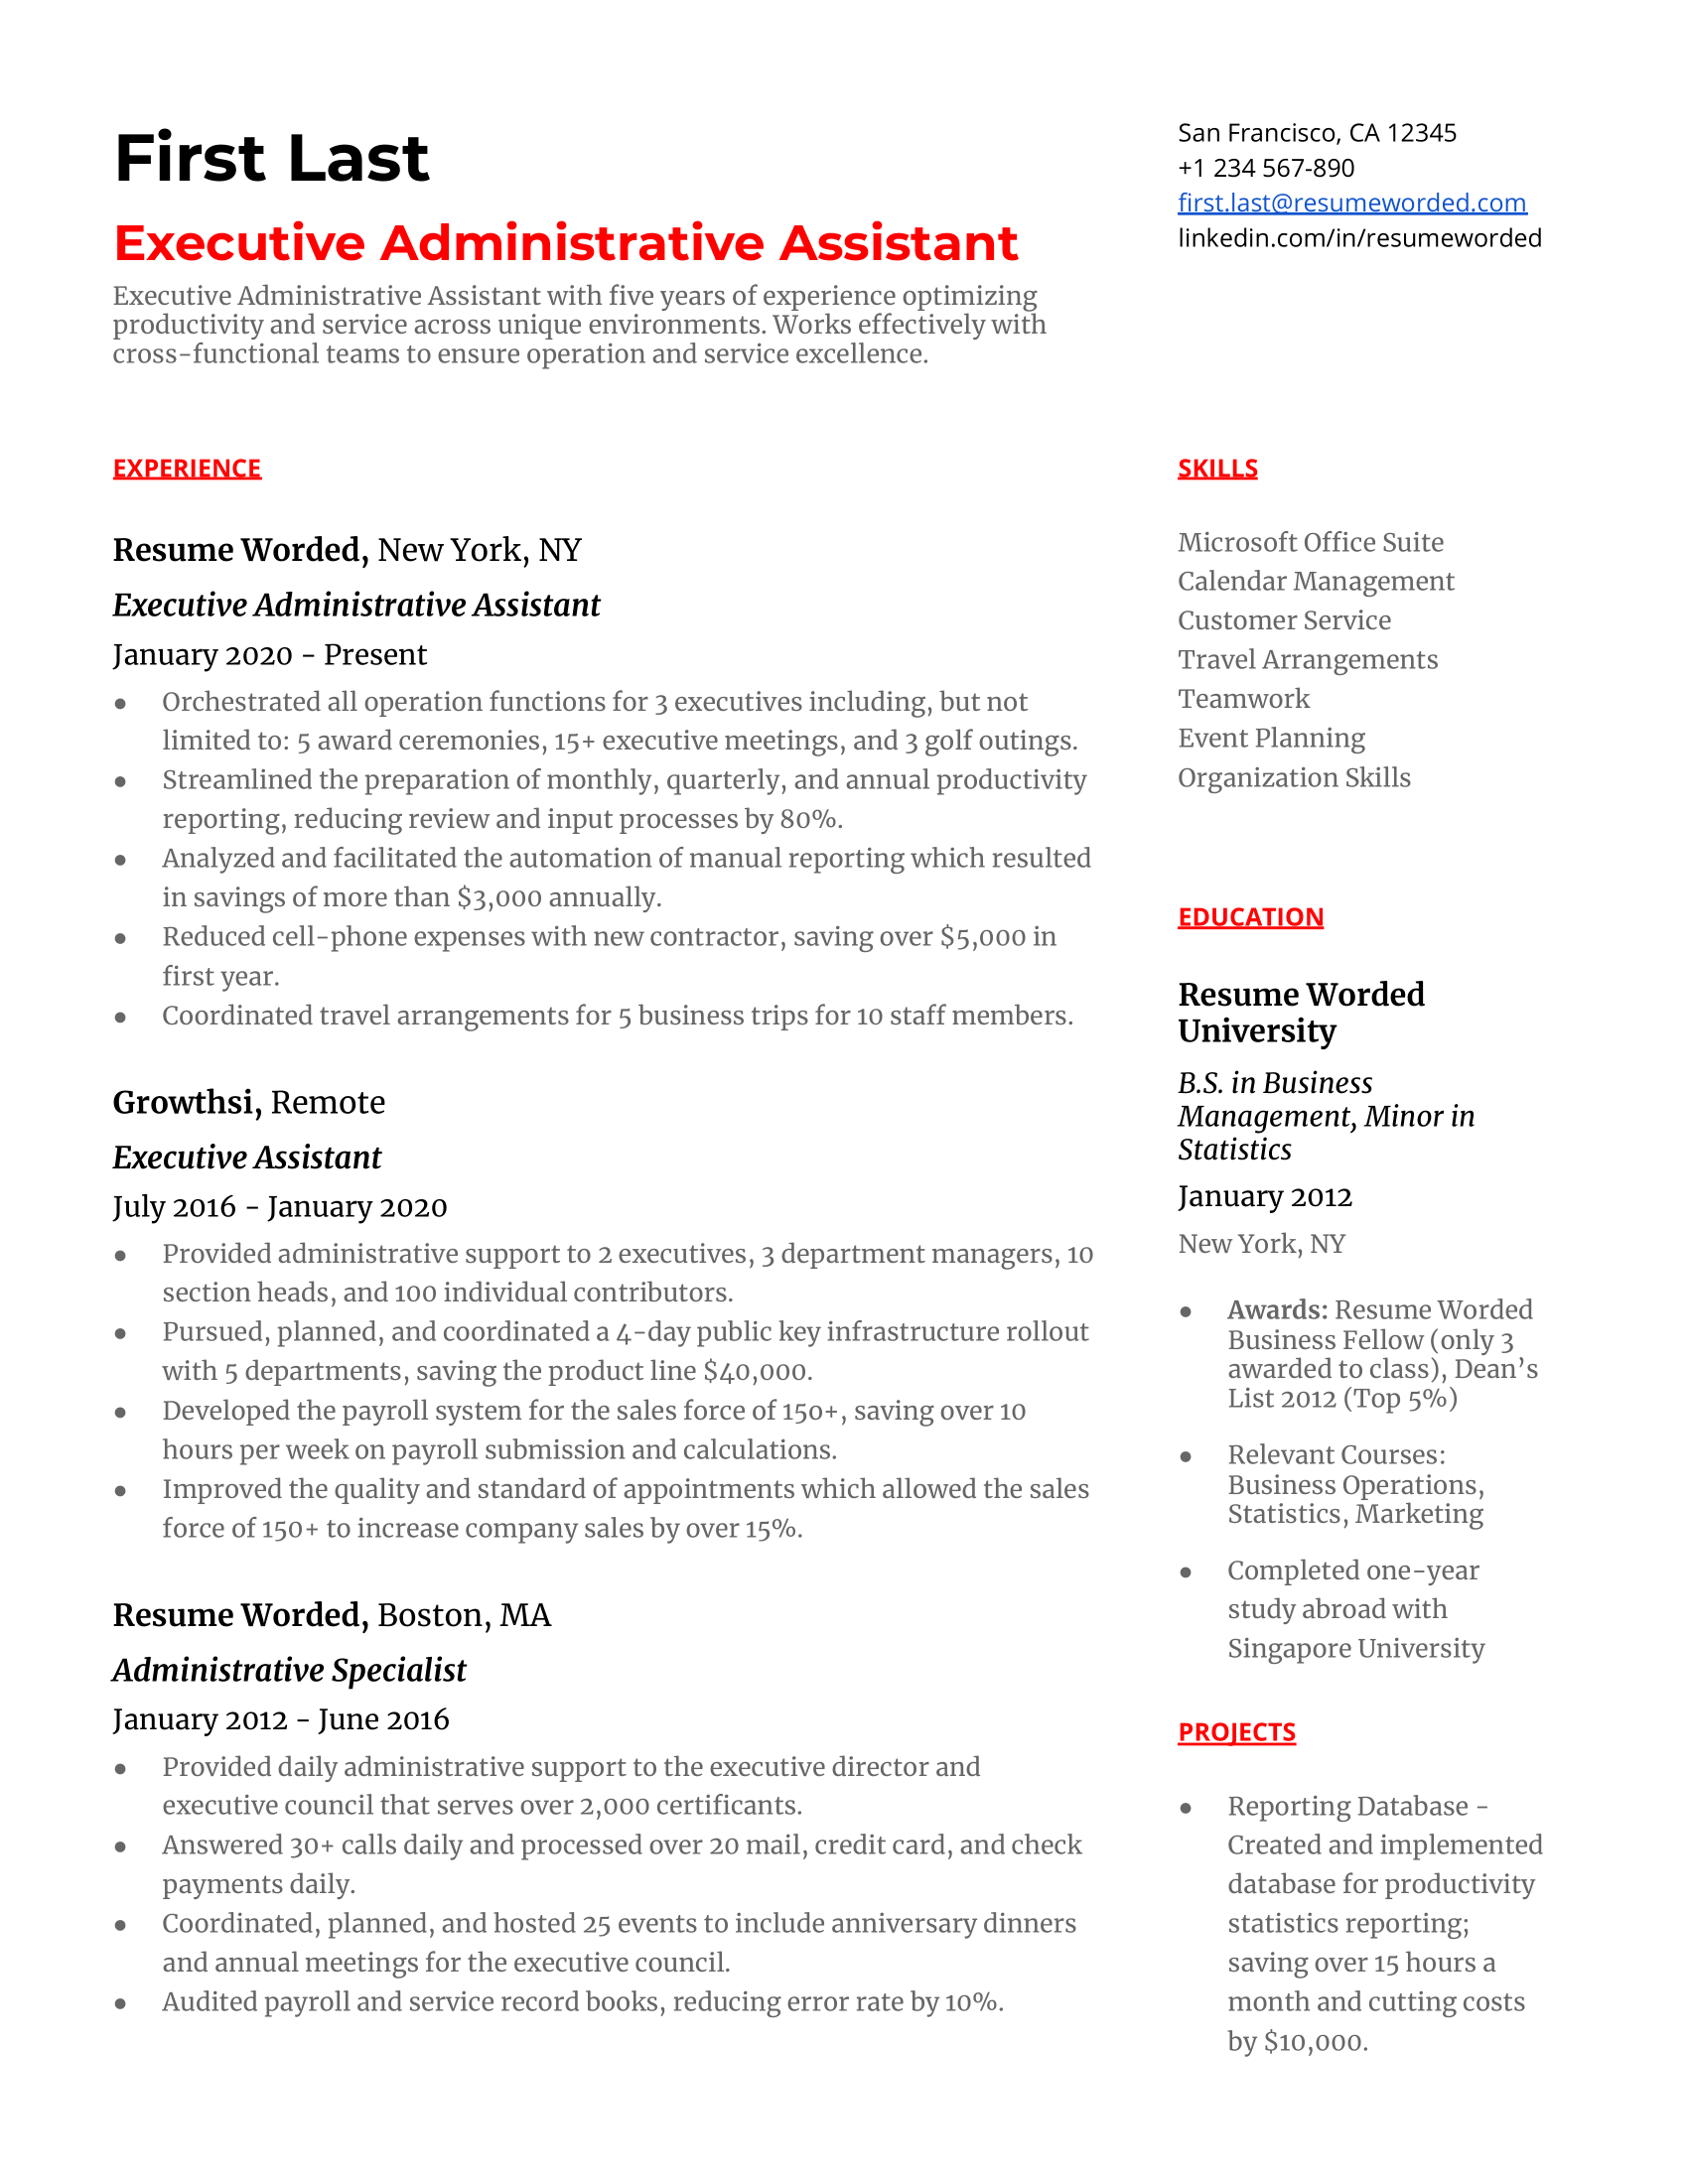 This is an example of a CV for an Executive Administrative Assistant role.